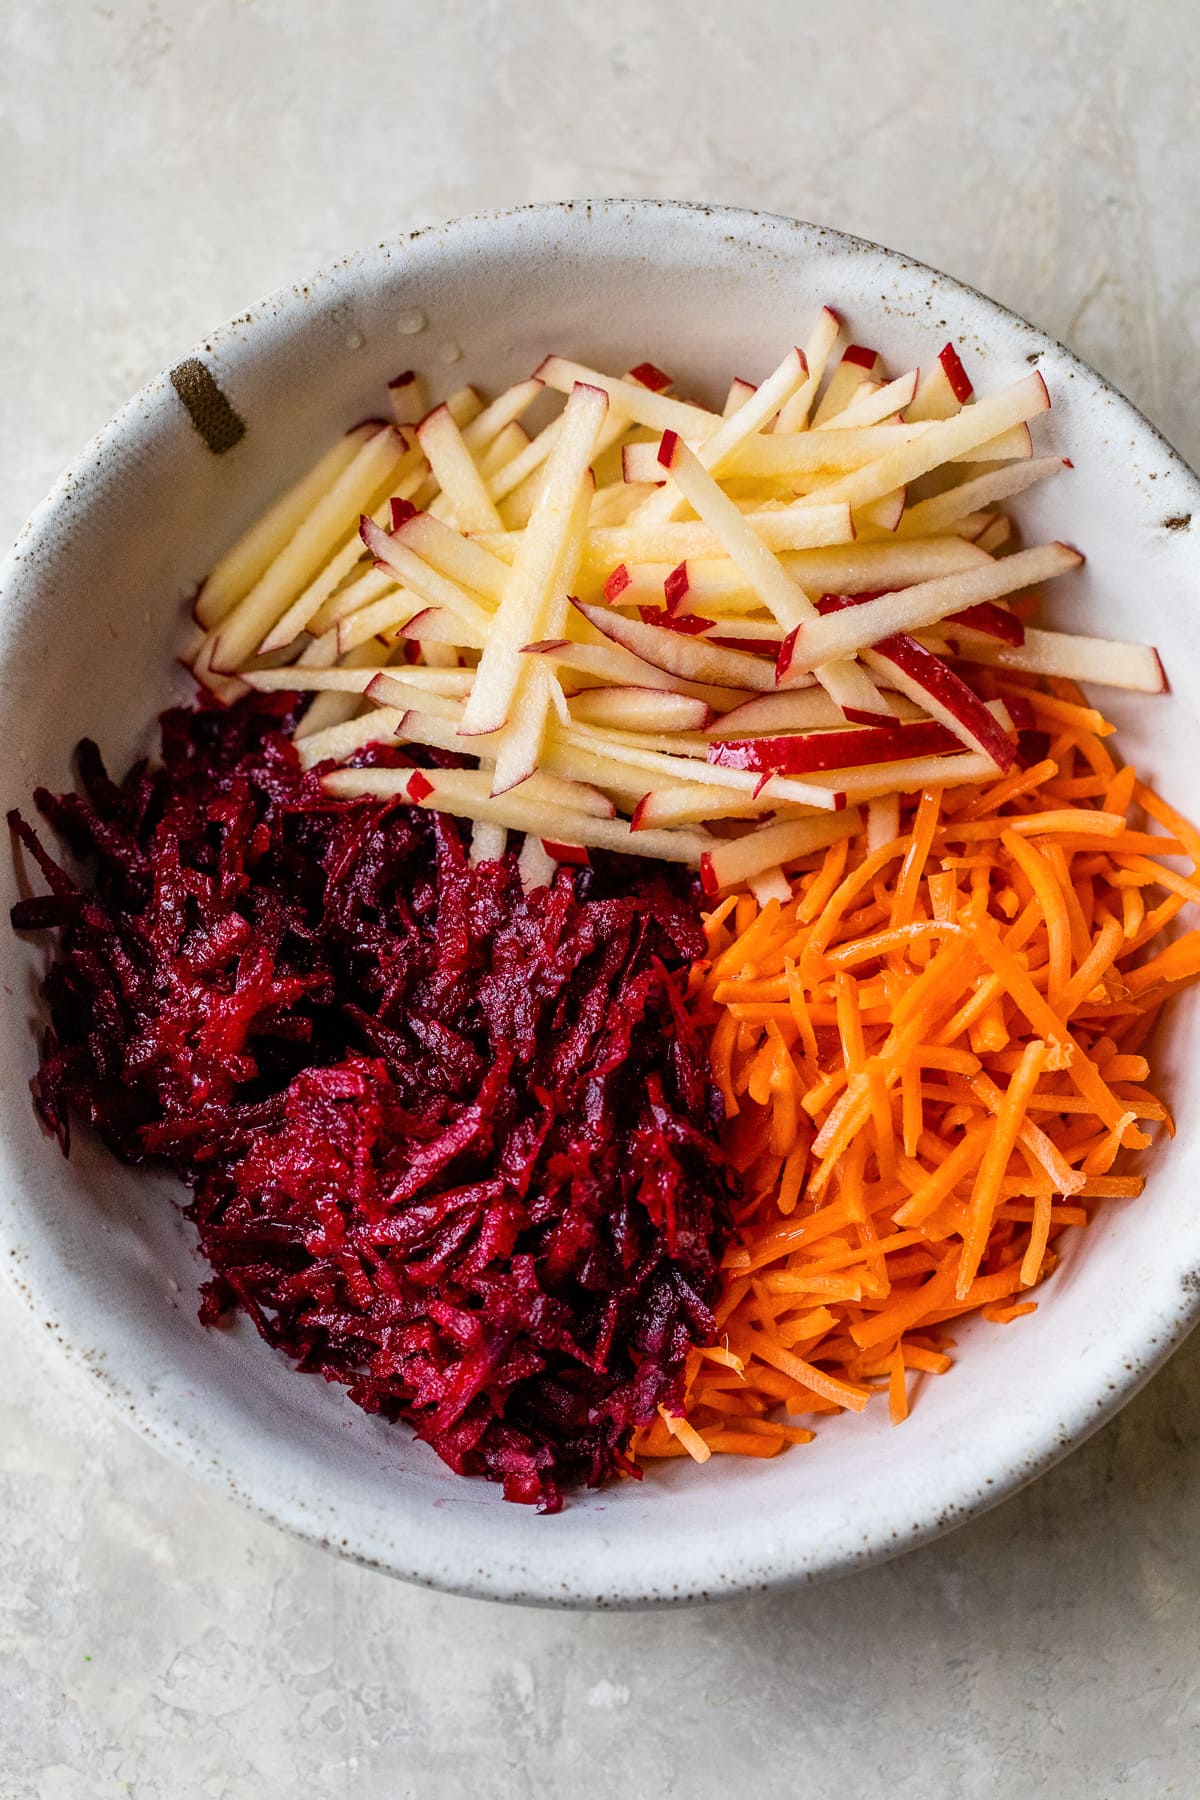 Uncooked Beet Salad with Apples and Carrots